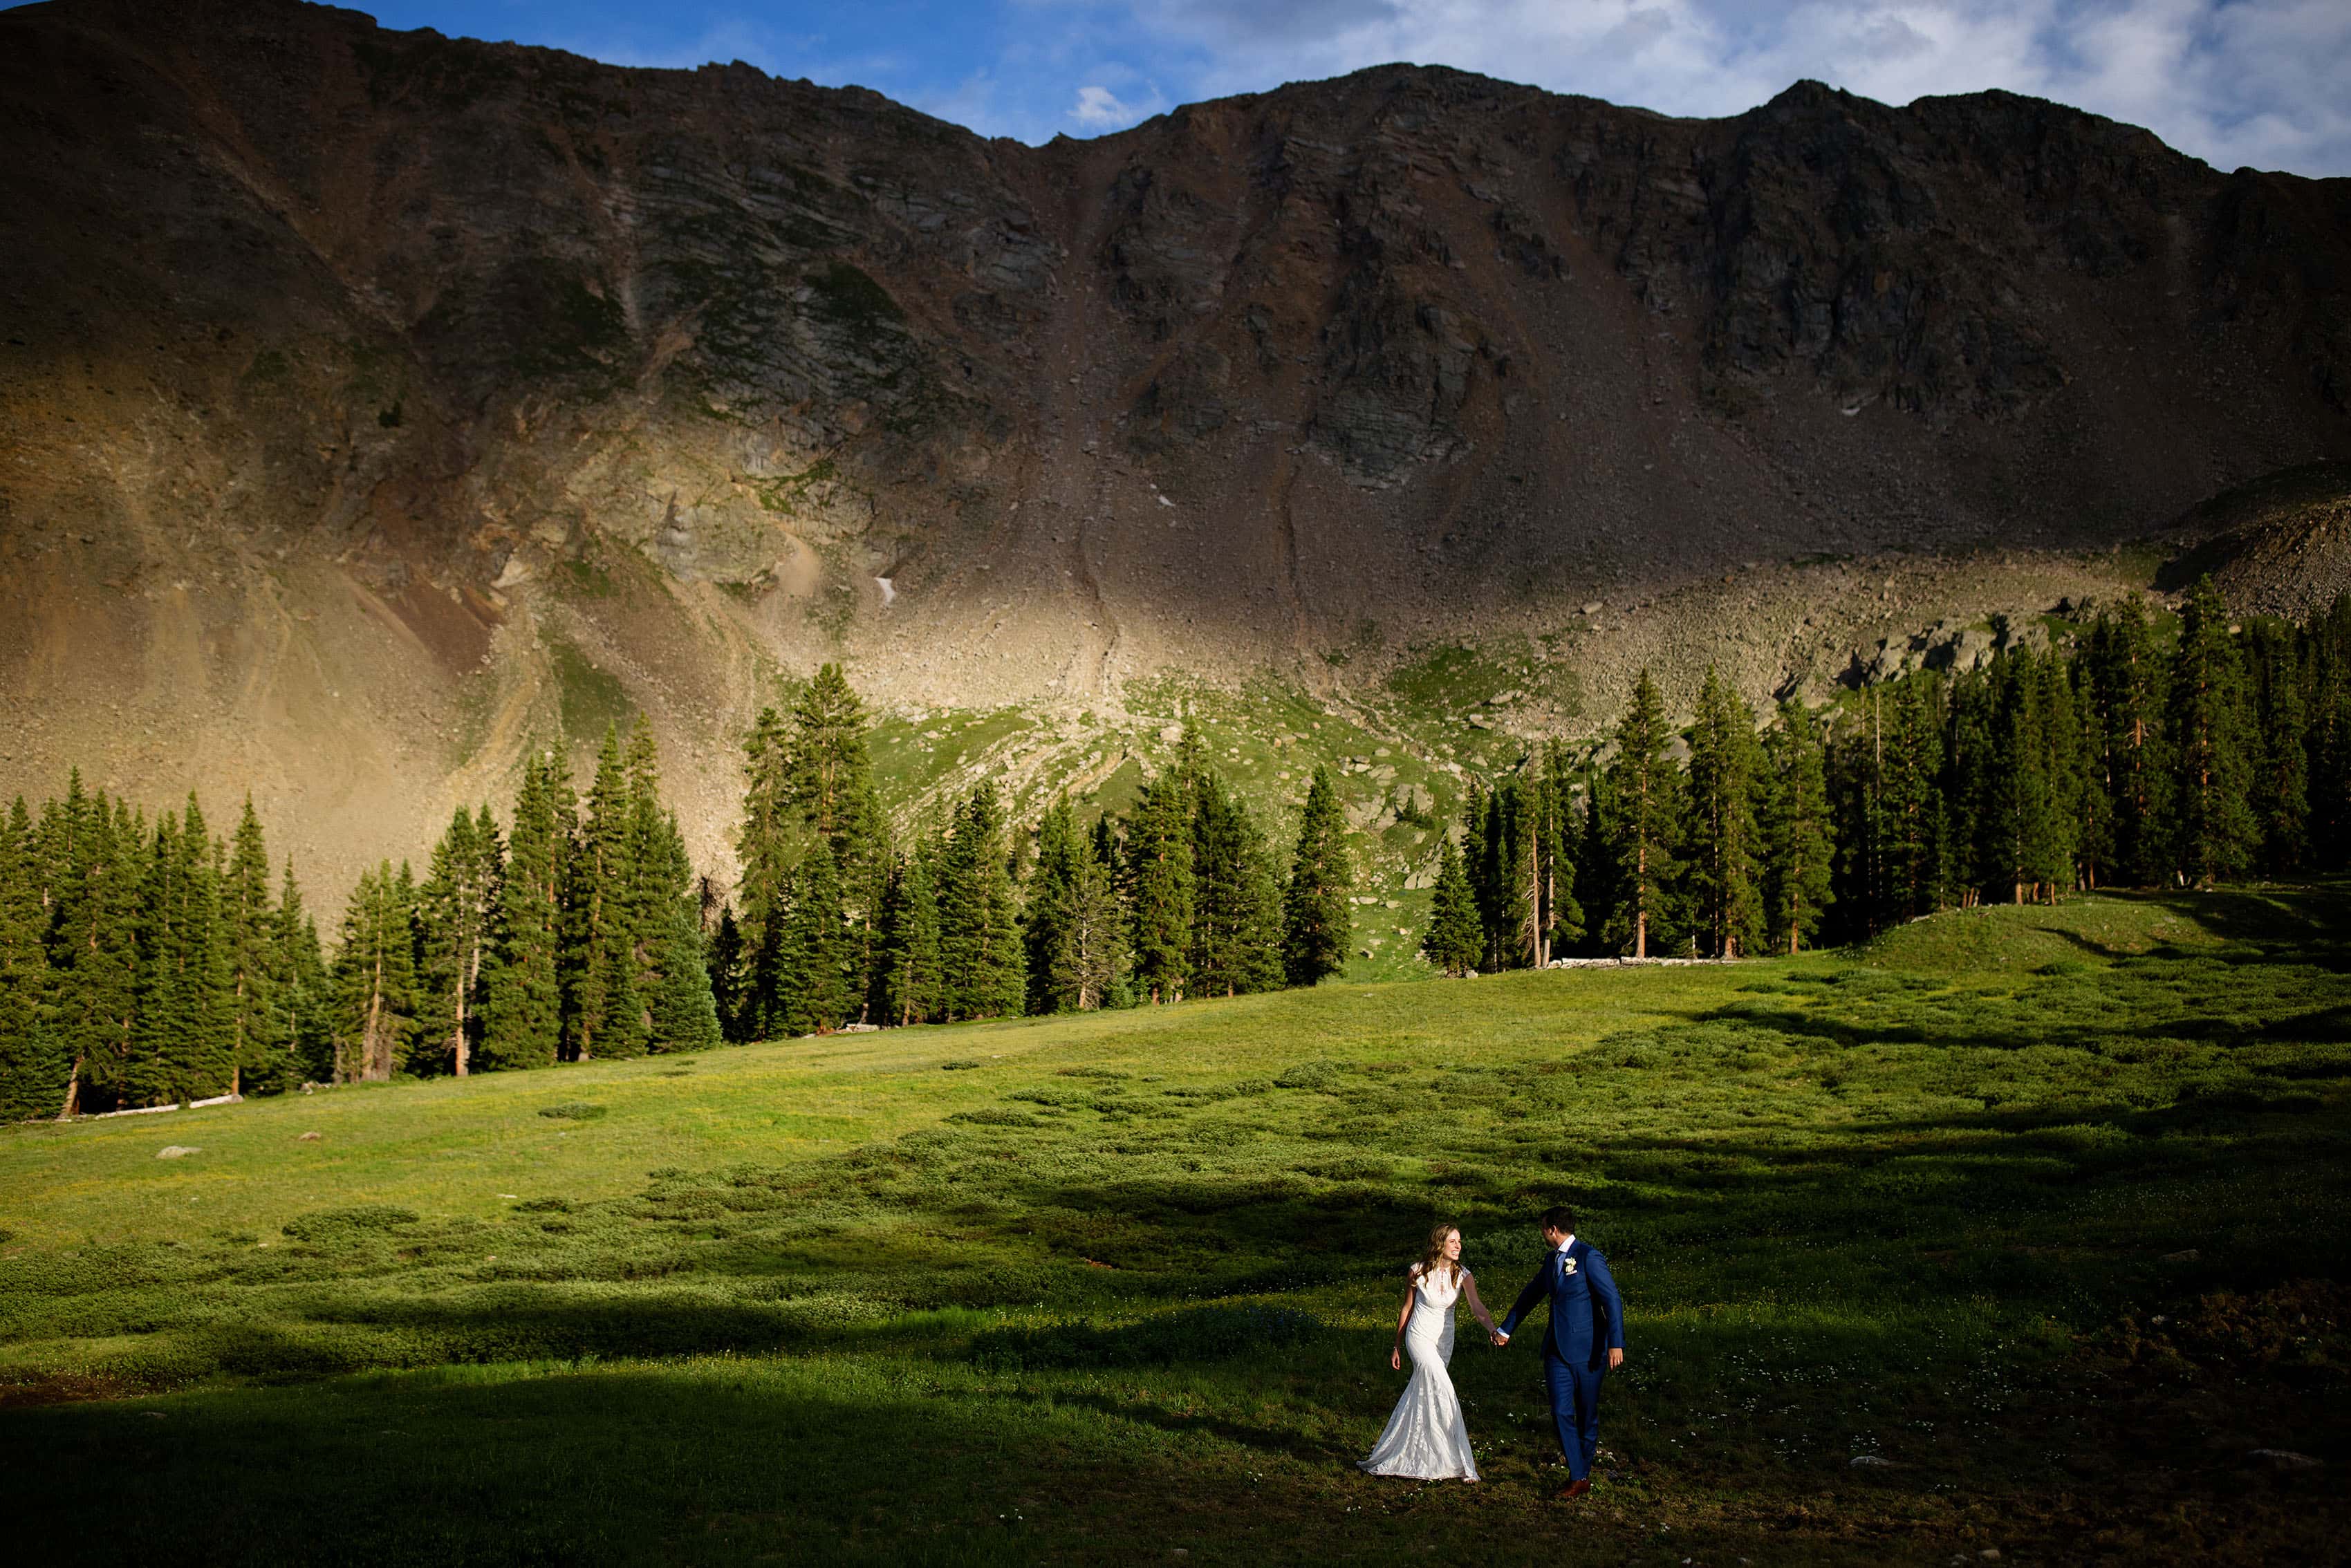 The bride and groom walk through a shaft of light at Arahoe Basin